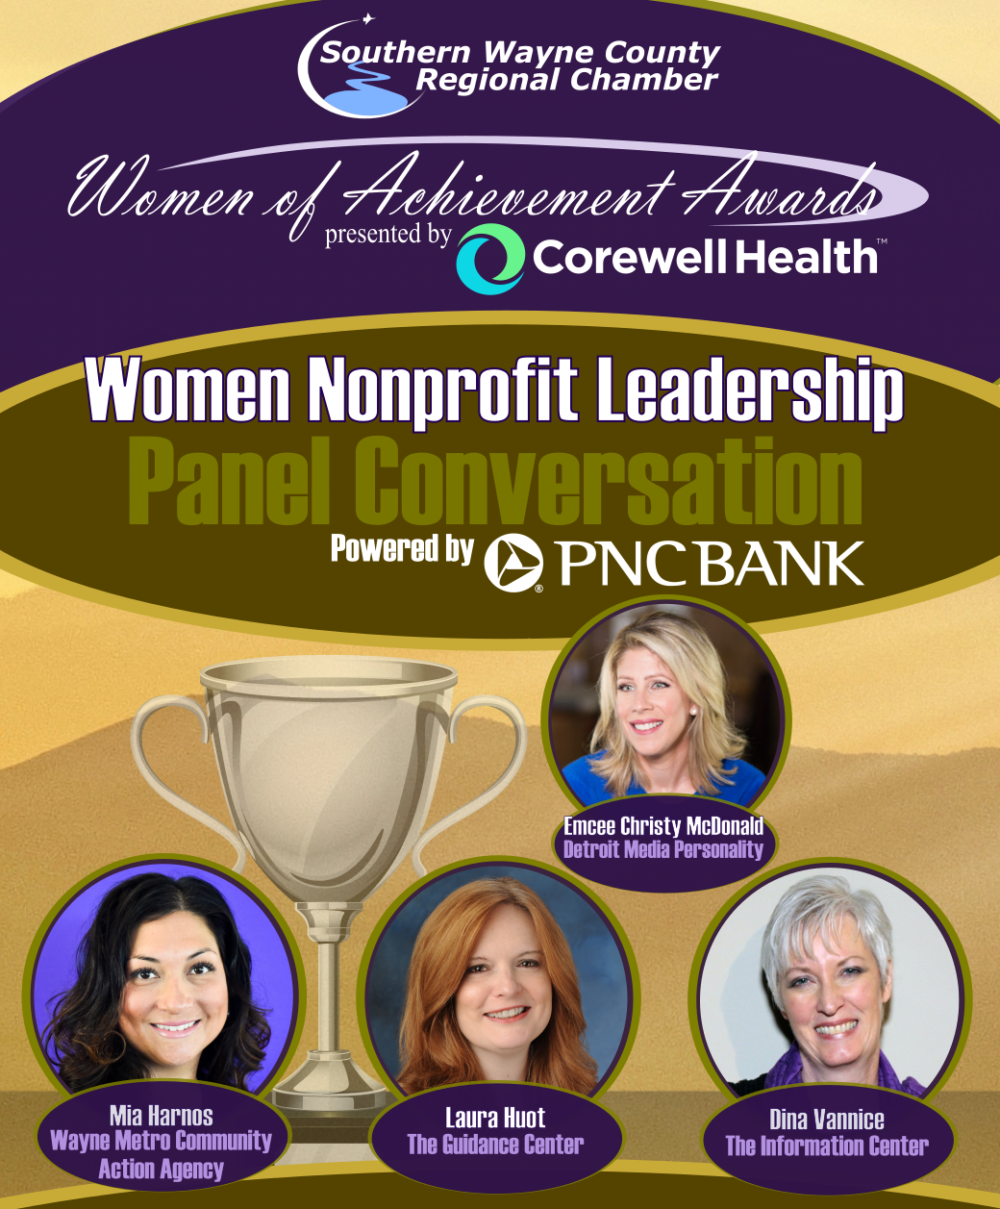 Women of Achievement Awards Presented by Corewell Health - SWCRC